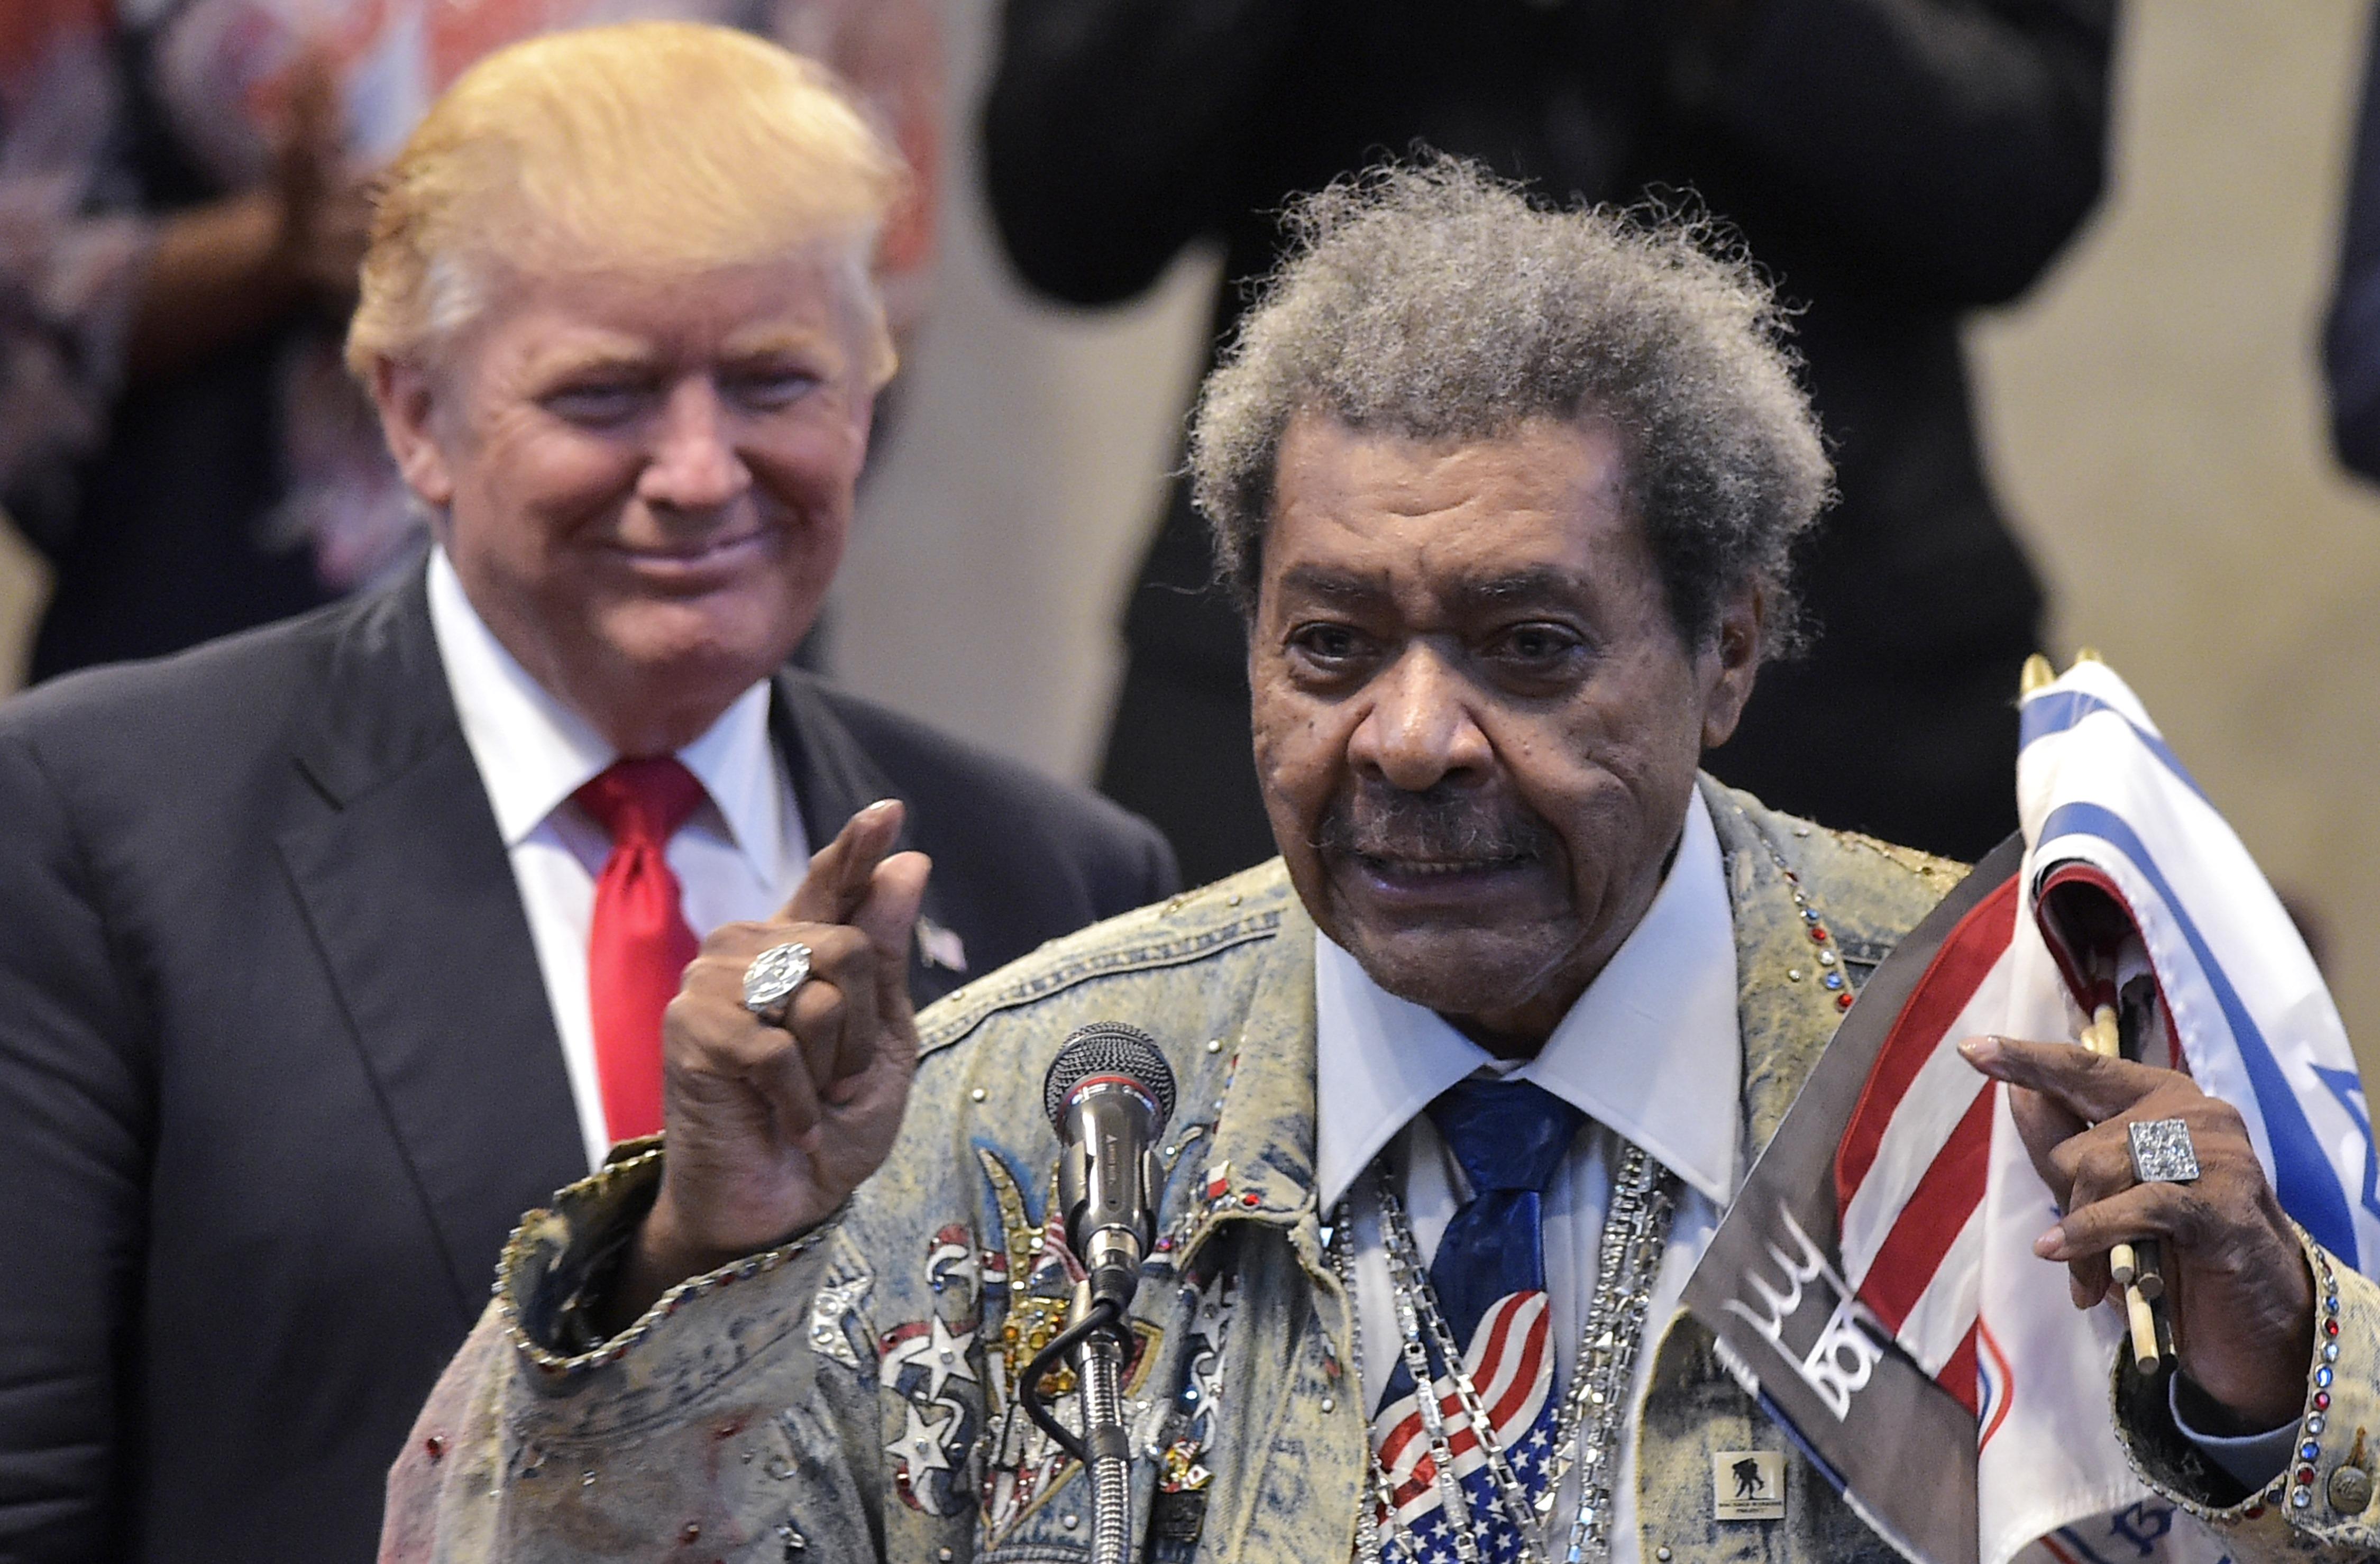 Trump supporter Don King says n-word at pastors event - CBS News4500 x 2957